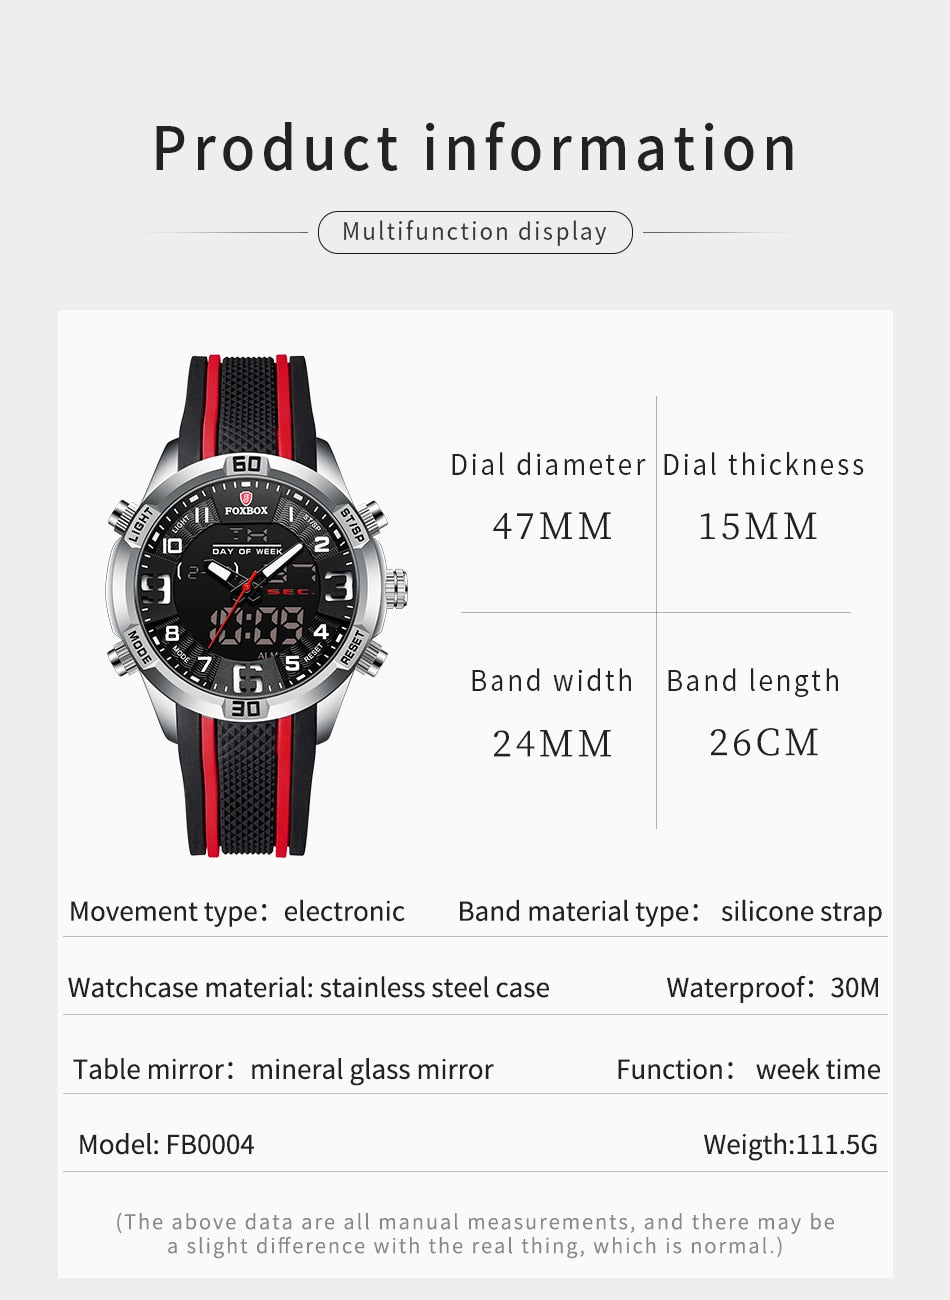 Foxbox Sport Mens Watches Top Brand Luxury Dual Display Quartz Watch For Men Military Waterproof Digital Electronic Watch The Clothing Company Sydney